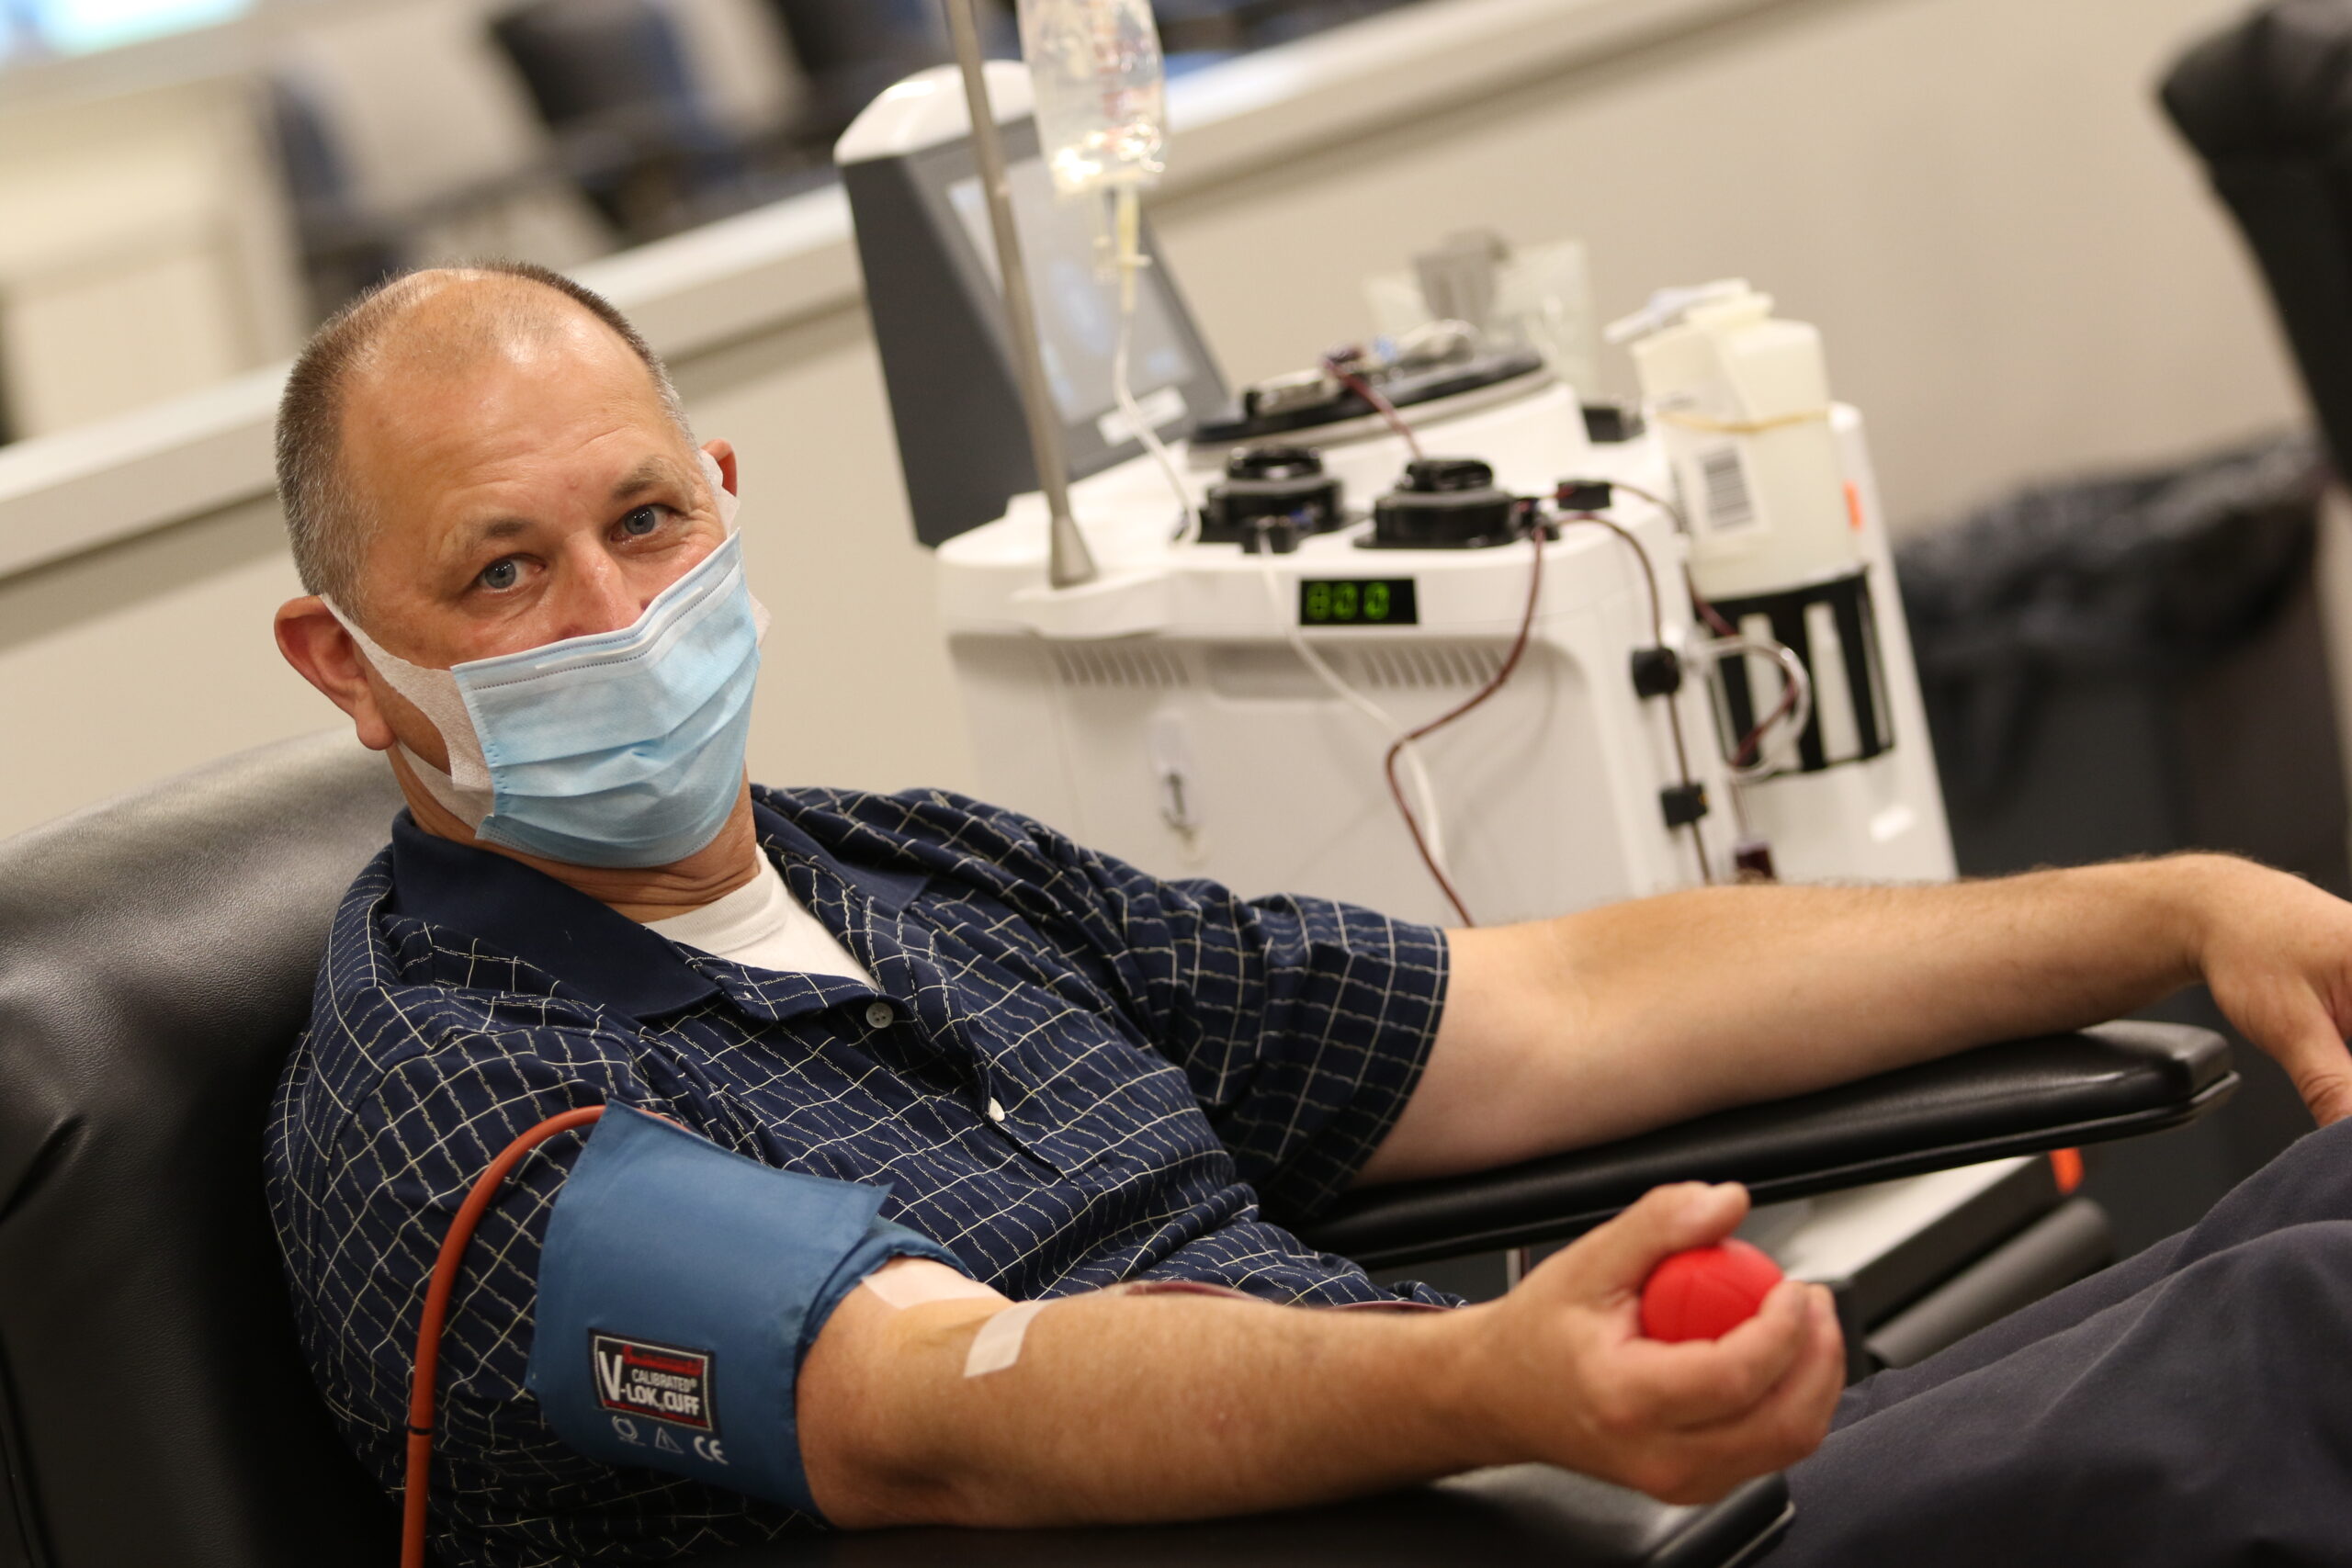 Make a Positive Impact in Our Community by Donating Plasma